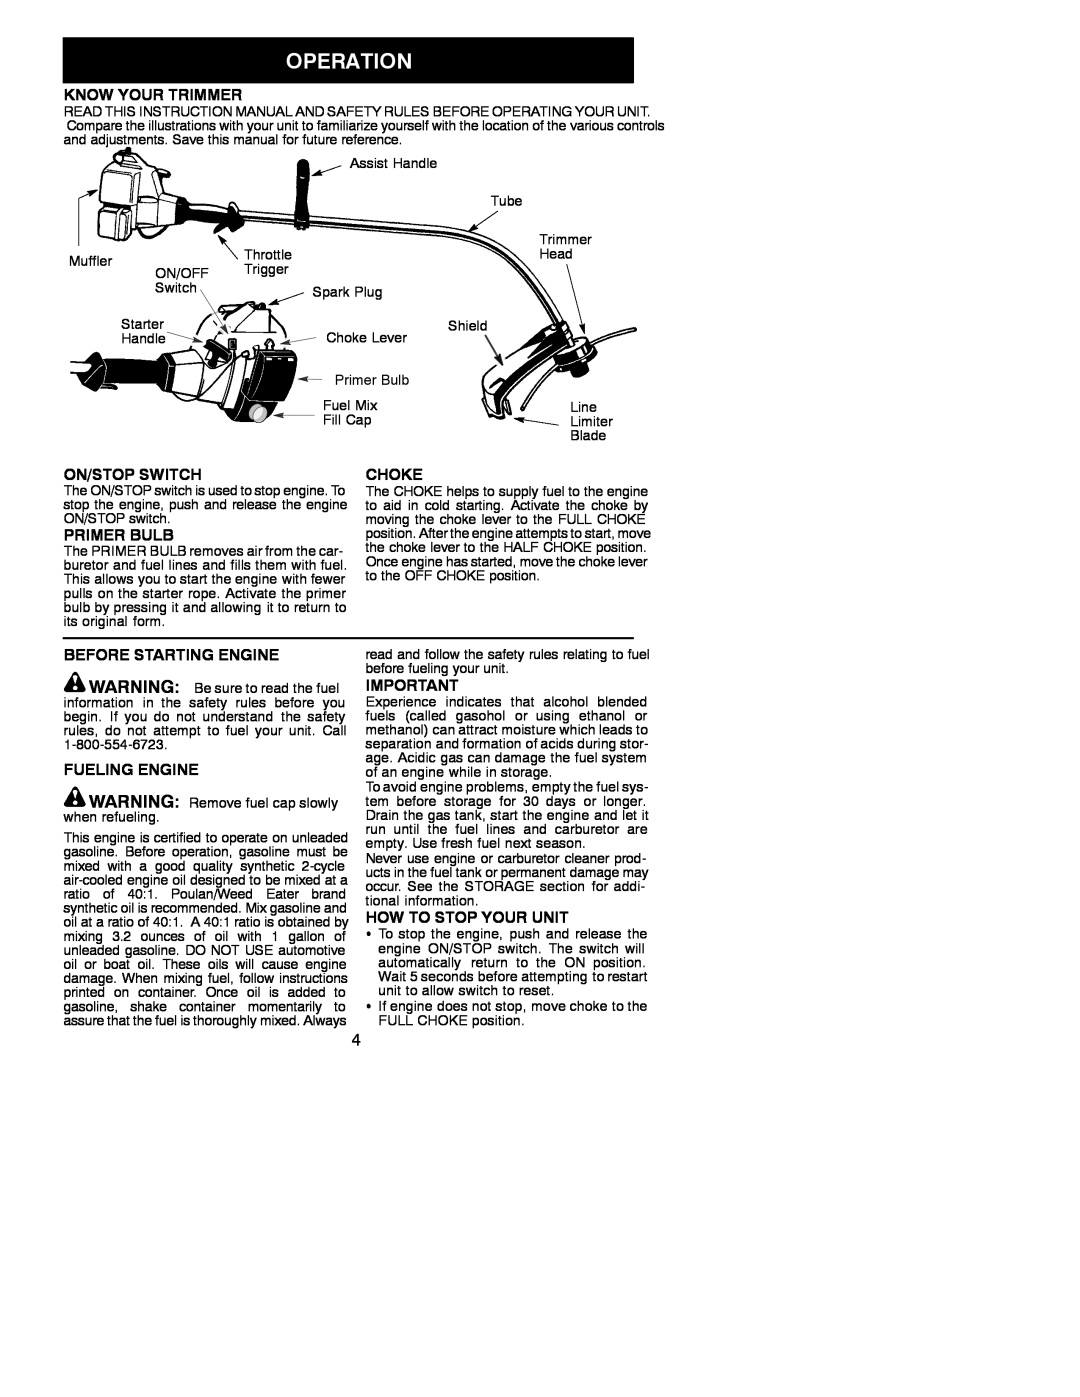 Poulan PL200 Know Your Trimmer, On/Stop Switch, Choke, Primer Bulb, Before Starting Engine, Fueling Engine 